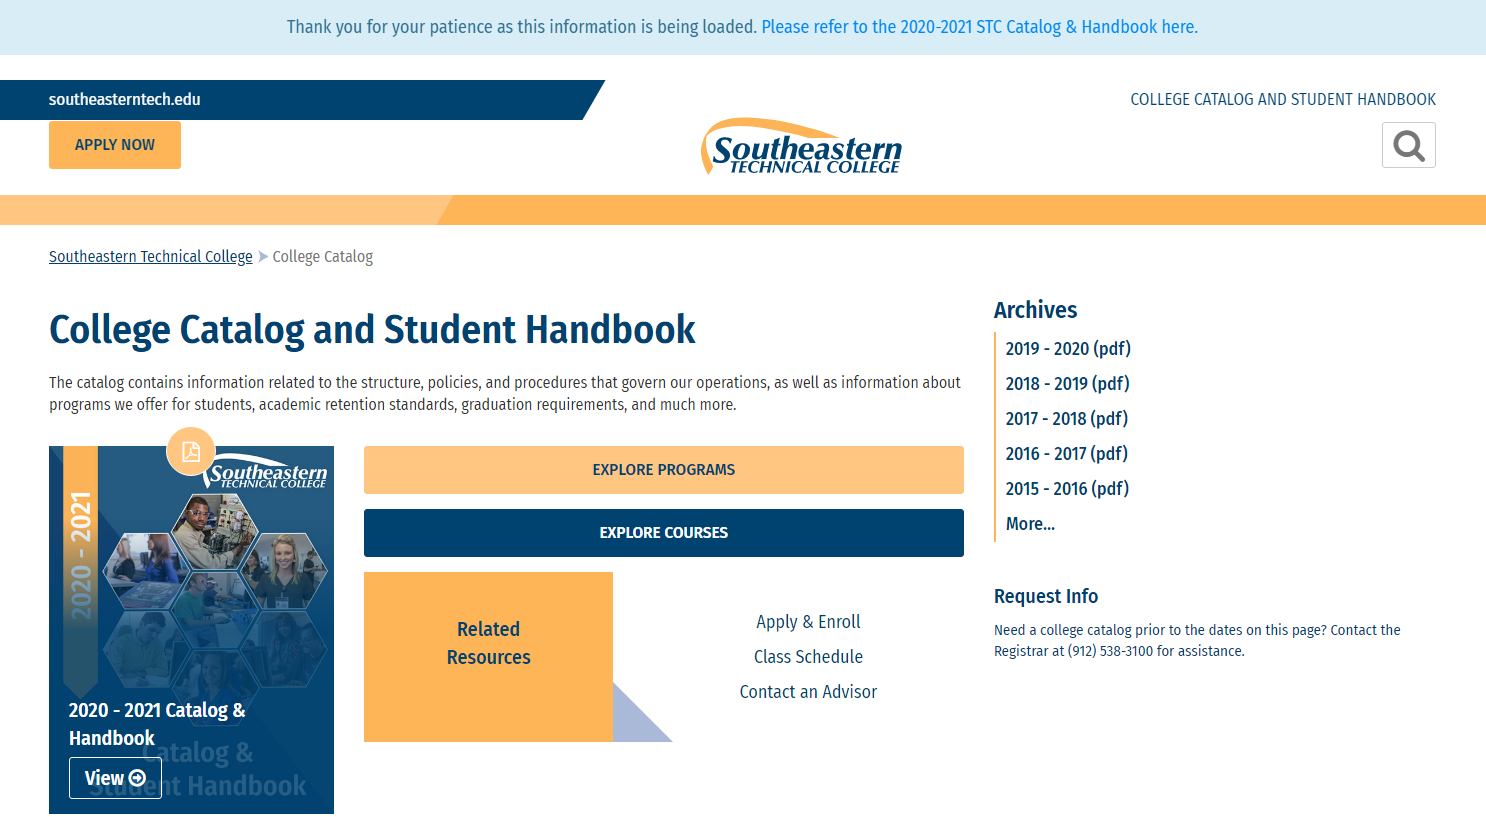 Southeastern Technical College Website